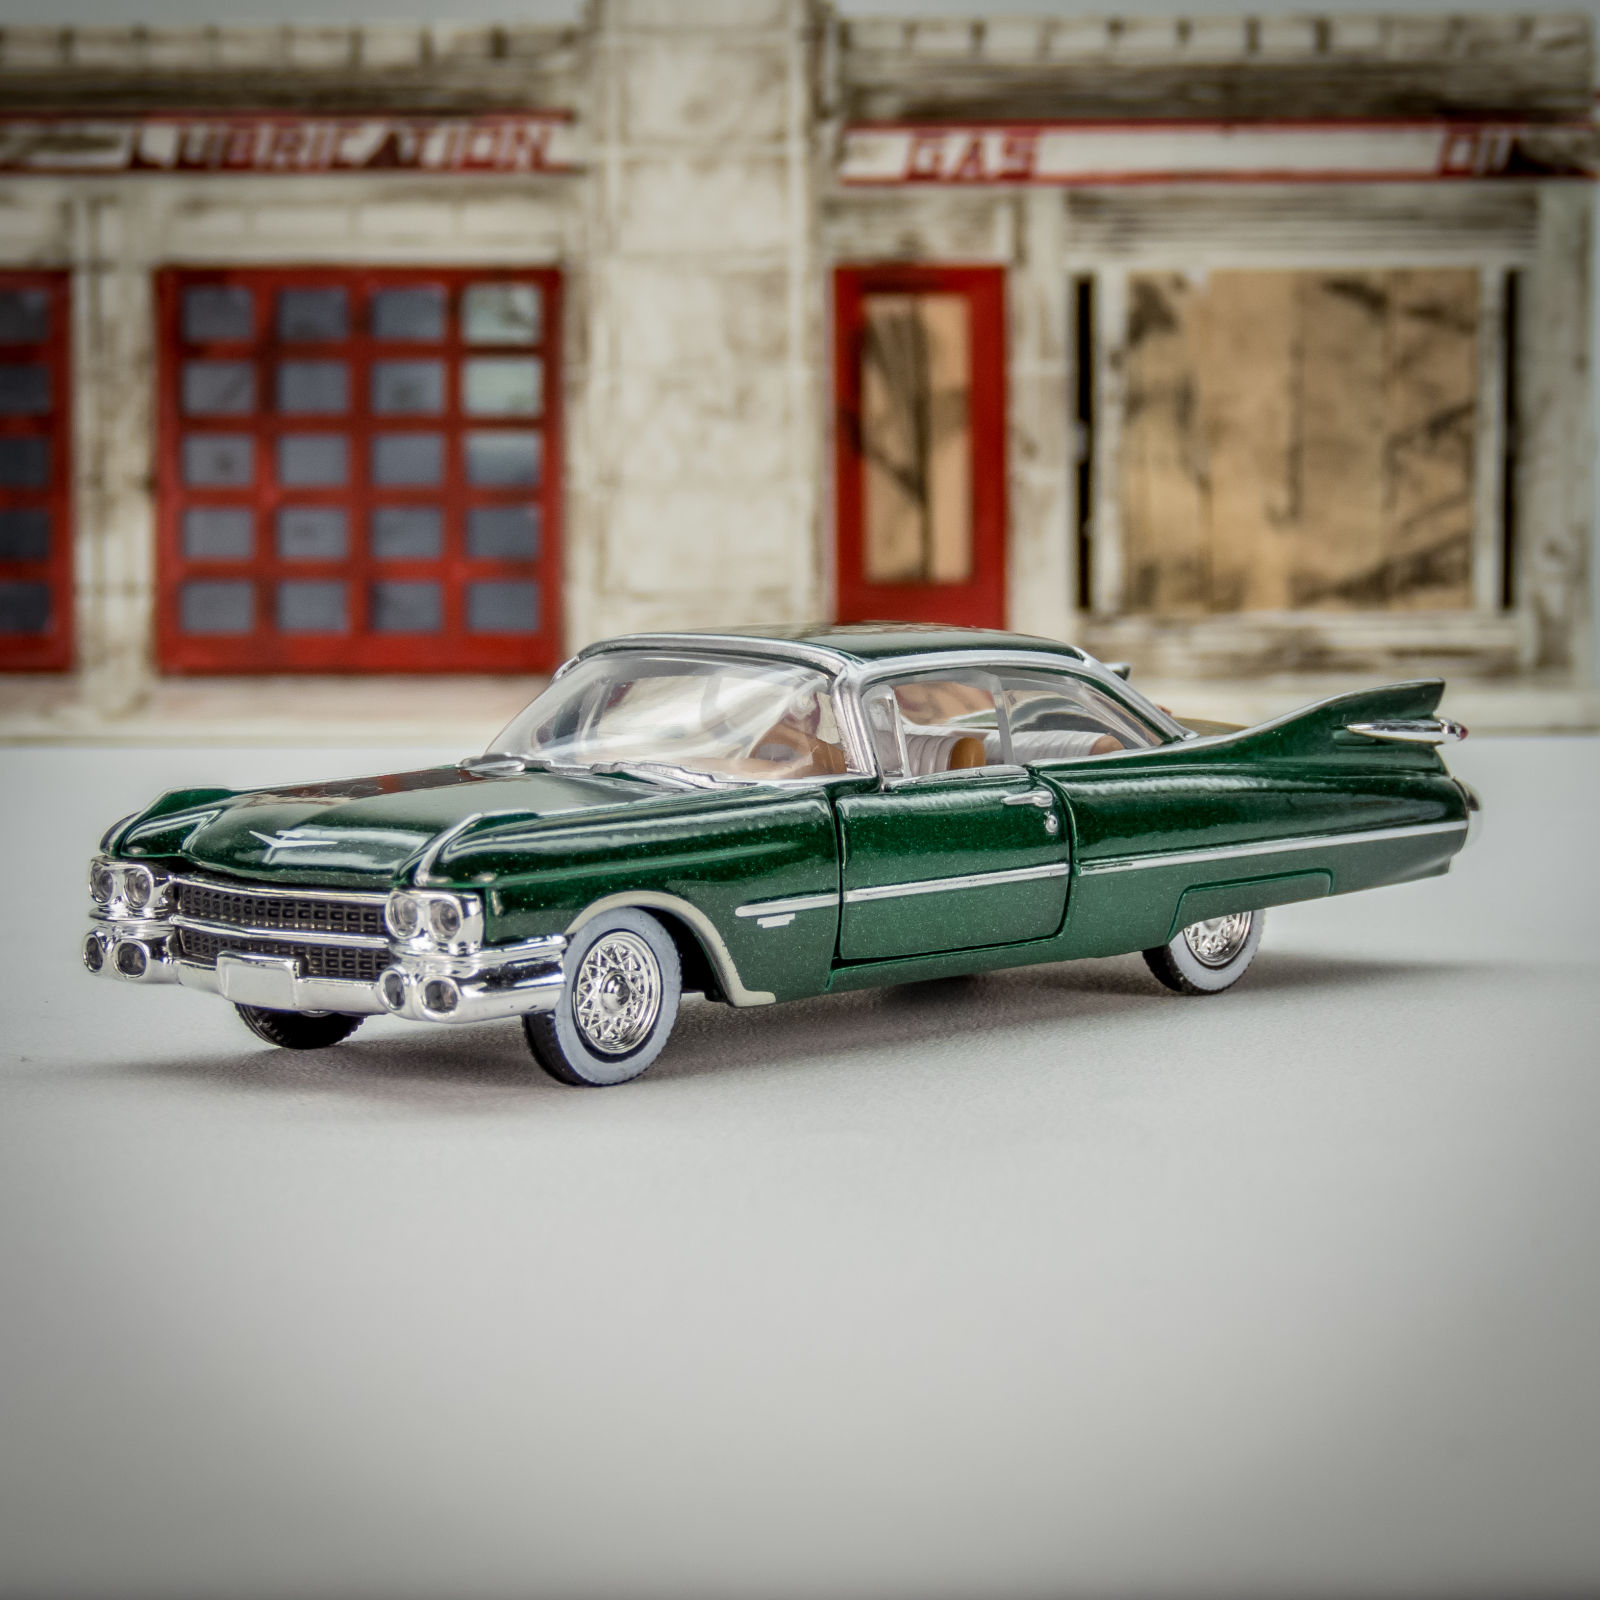 Illustration for article titled Video Review: M2 Machines 1959 Cadillac Series 62